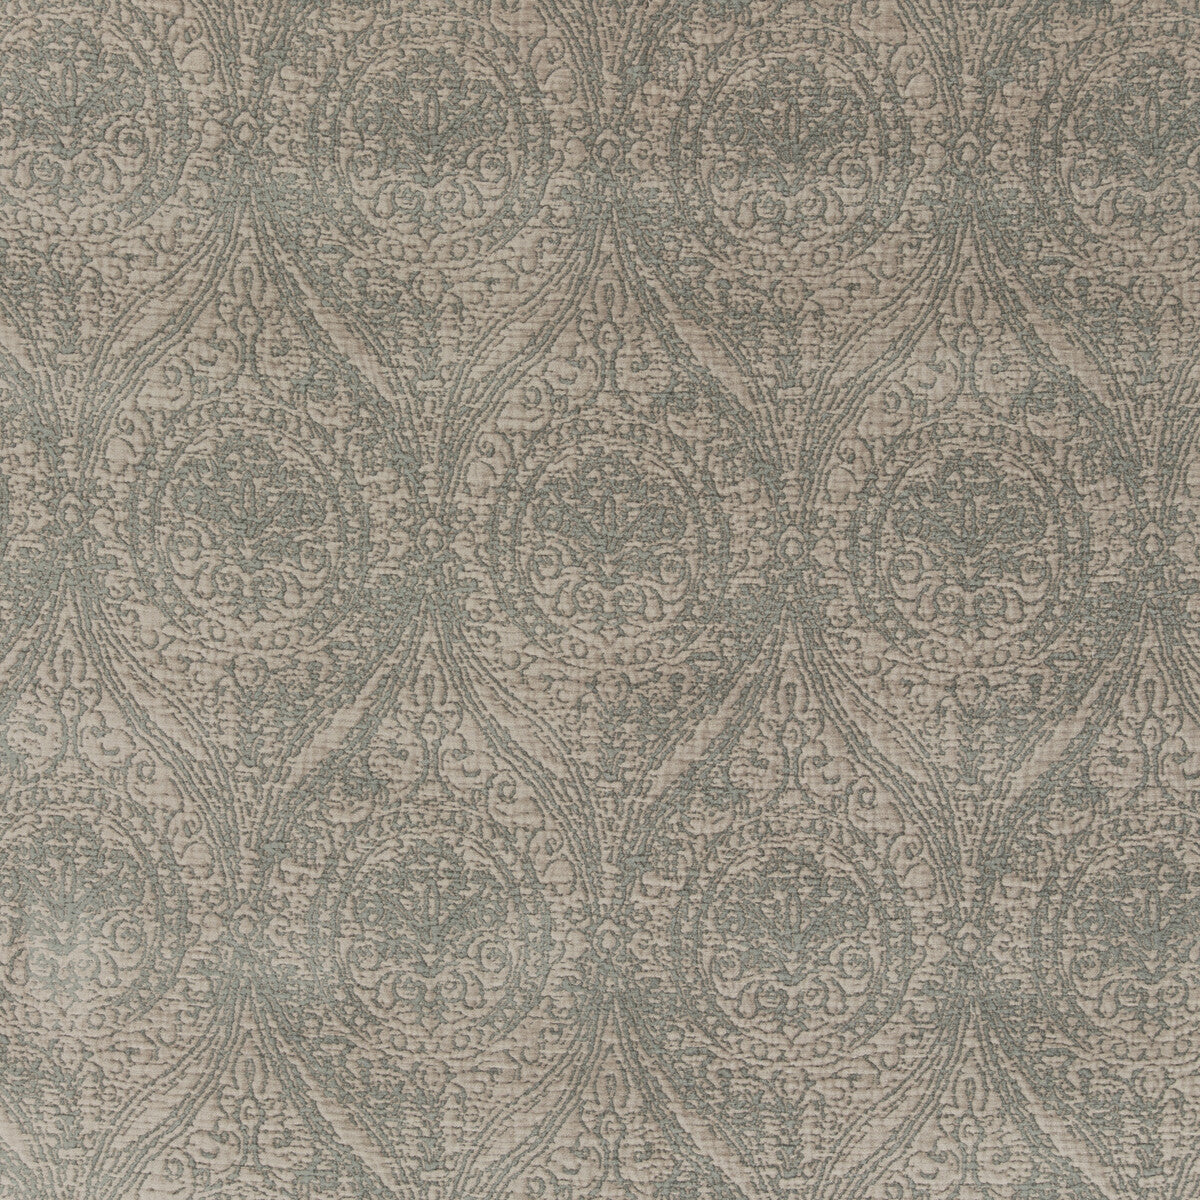 Wolsey fabric in verdigris color - pattern BF10654.2.0 - by G P &amp; J Baker in the Historic Royal Palaces collection